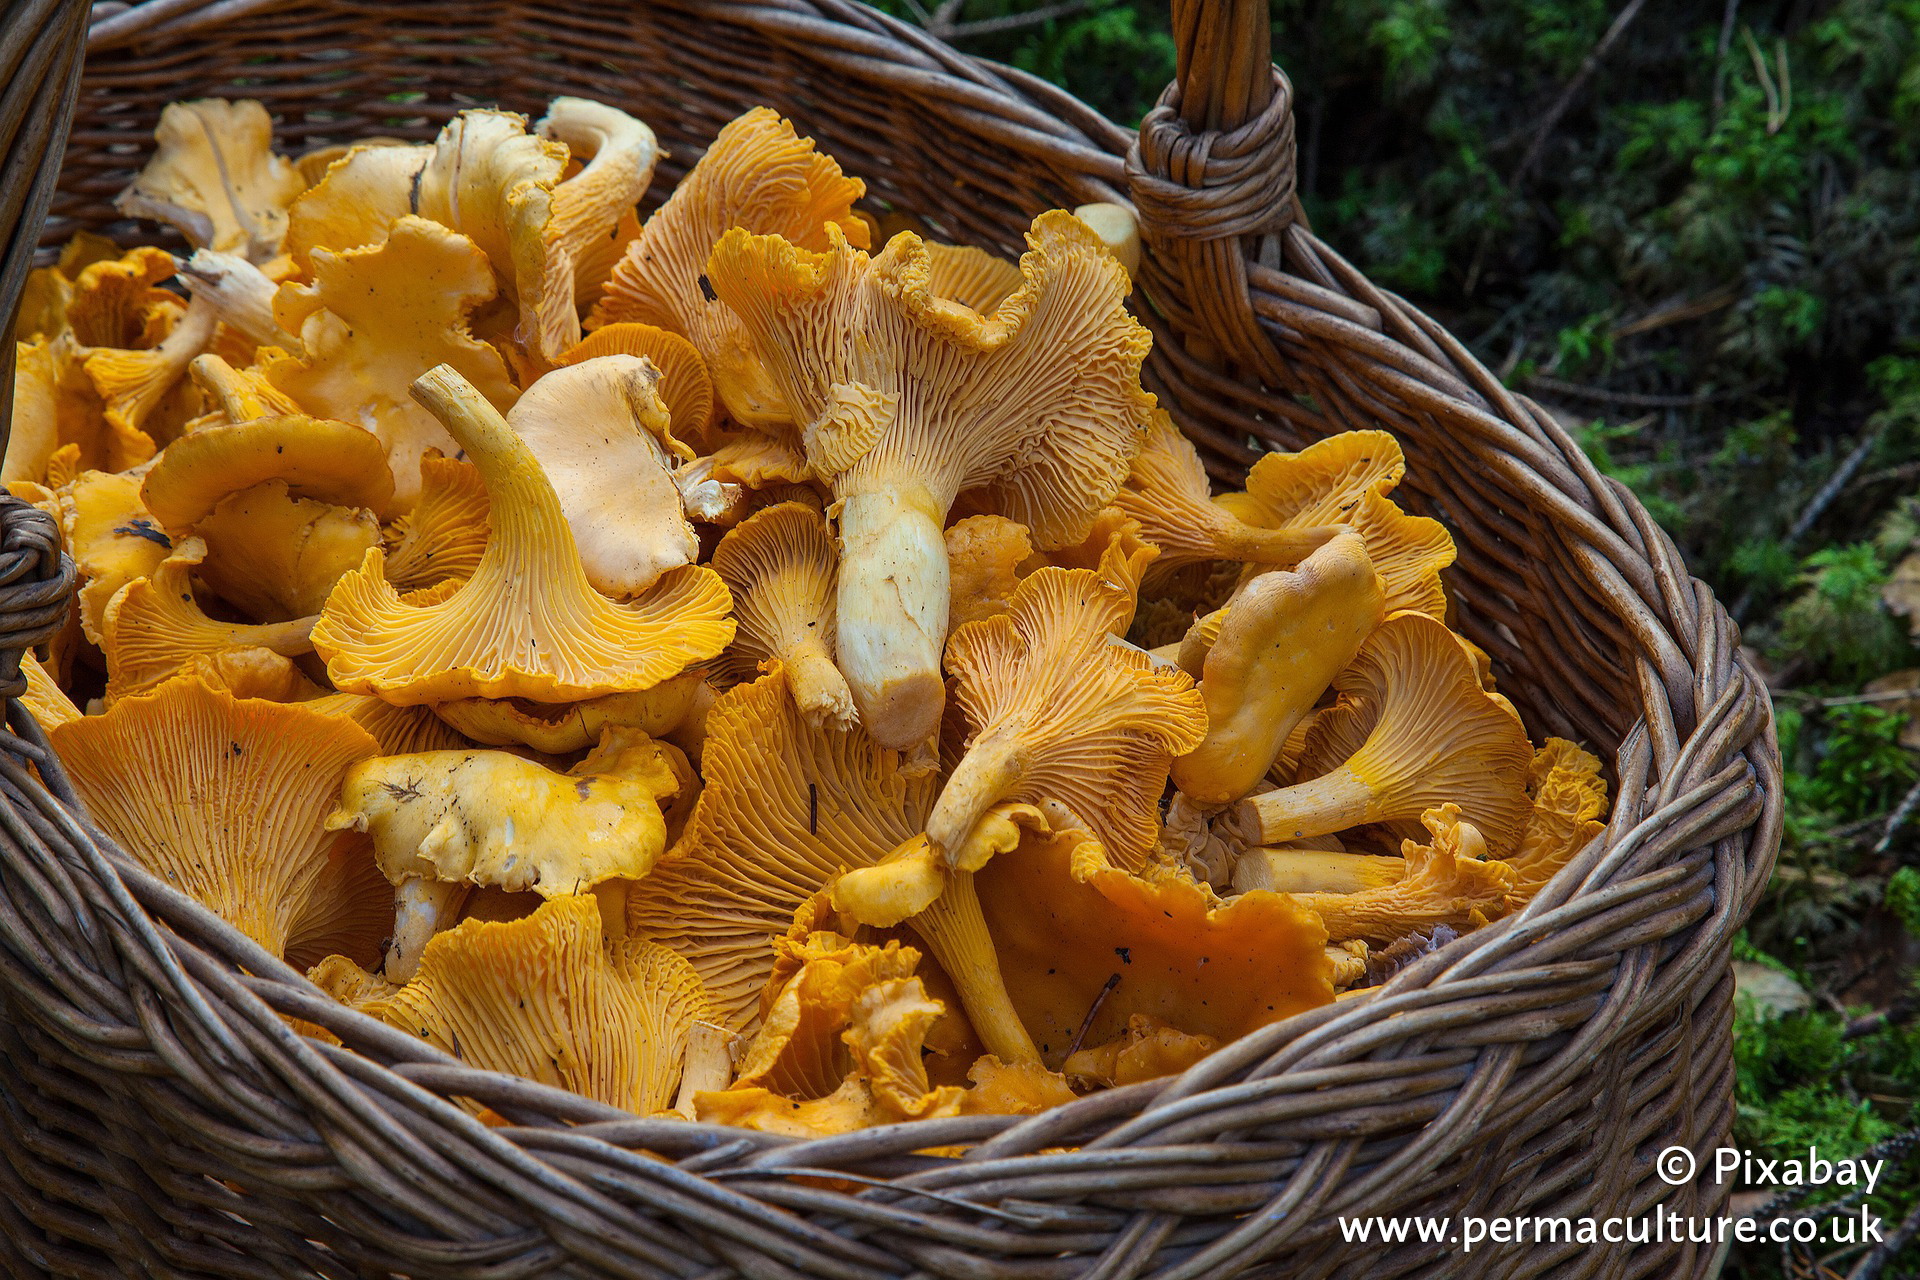 A Guide to Mushroom Foraging